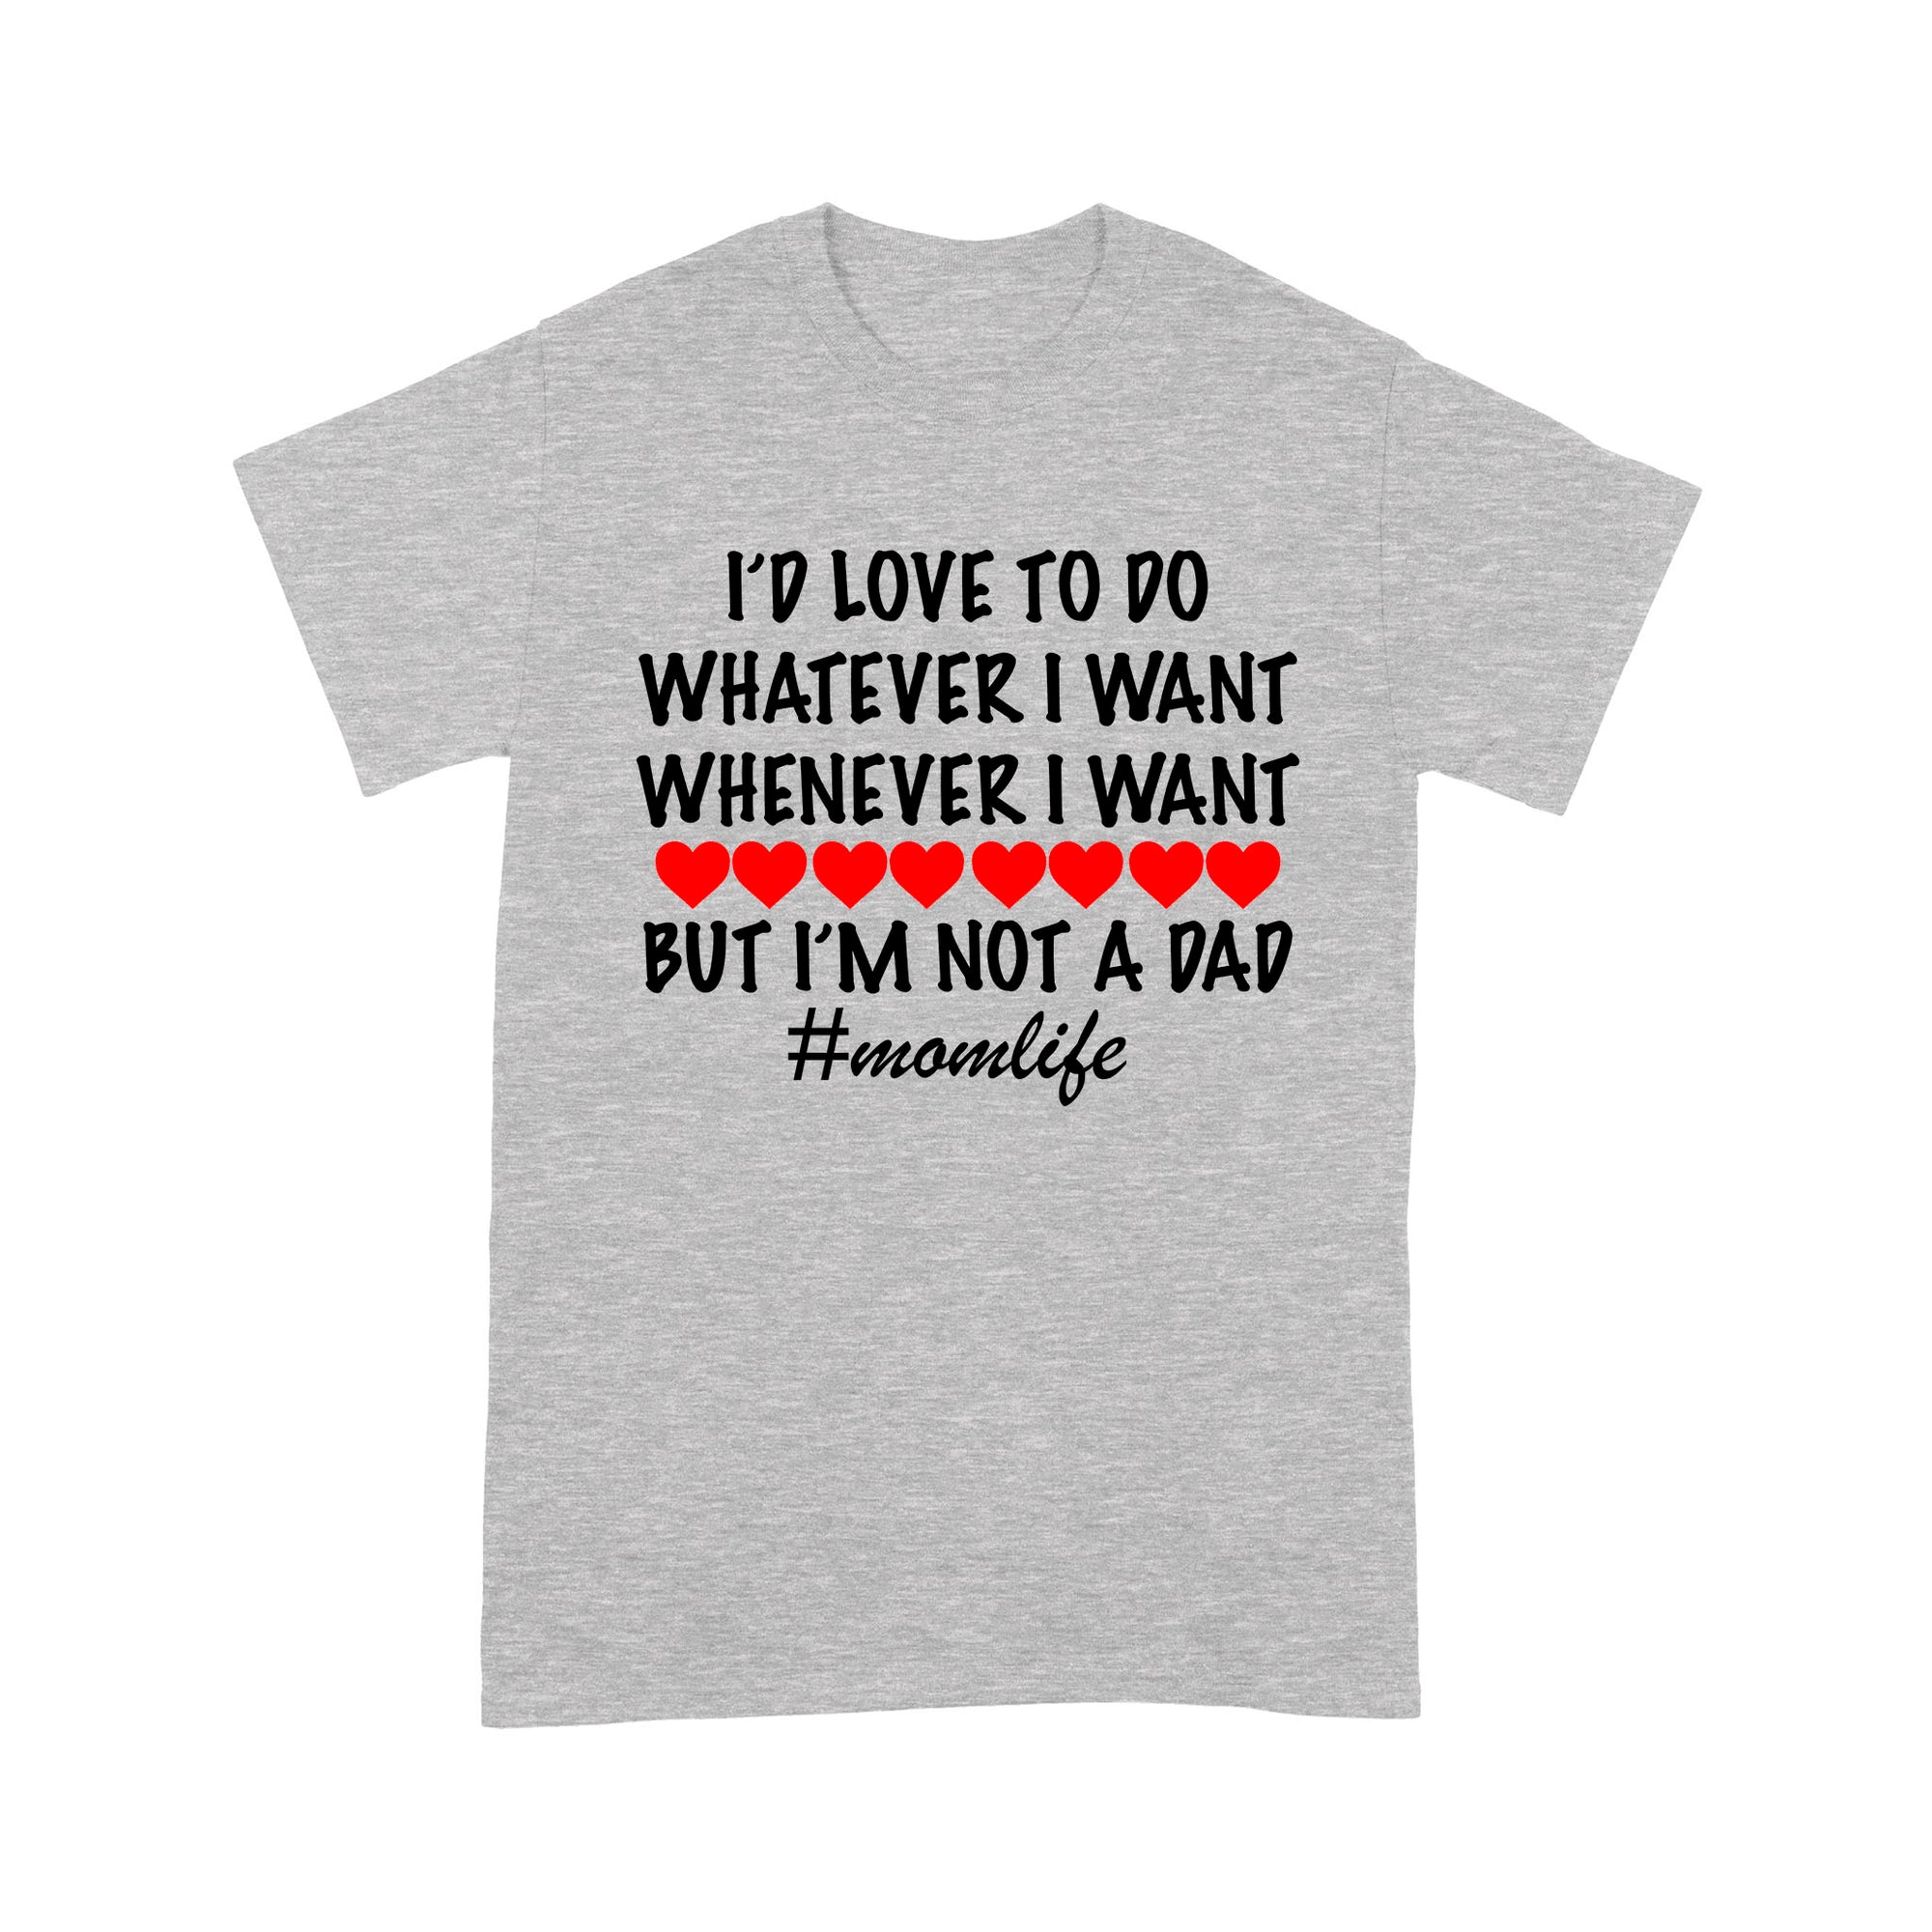 Gift Ideas for Dad I'd Love To Do Whatever I Want Whenever I Want But I'm Not A Dad (Momlife) (w) - Standard T-shirt